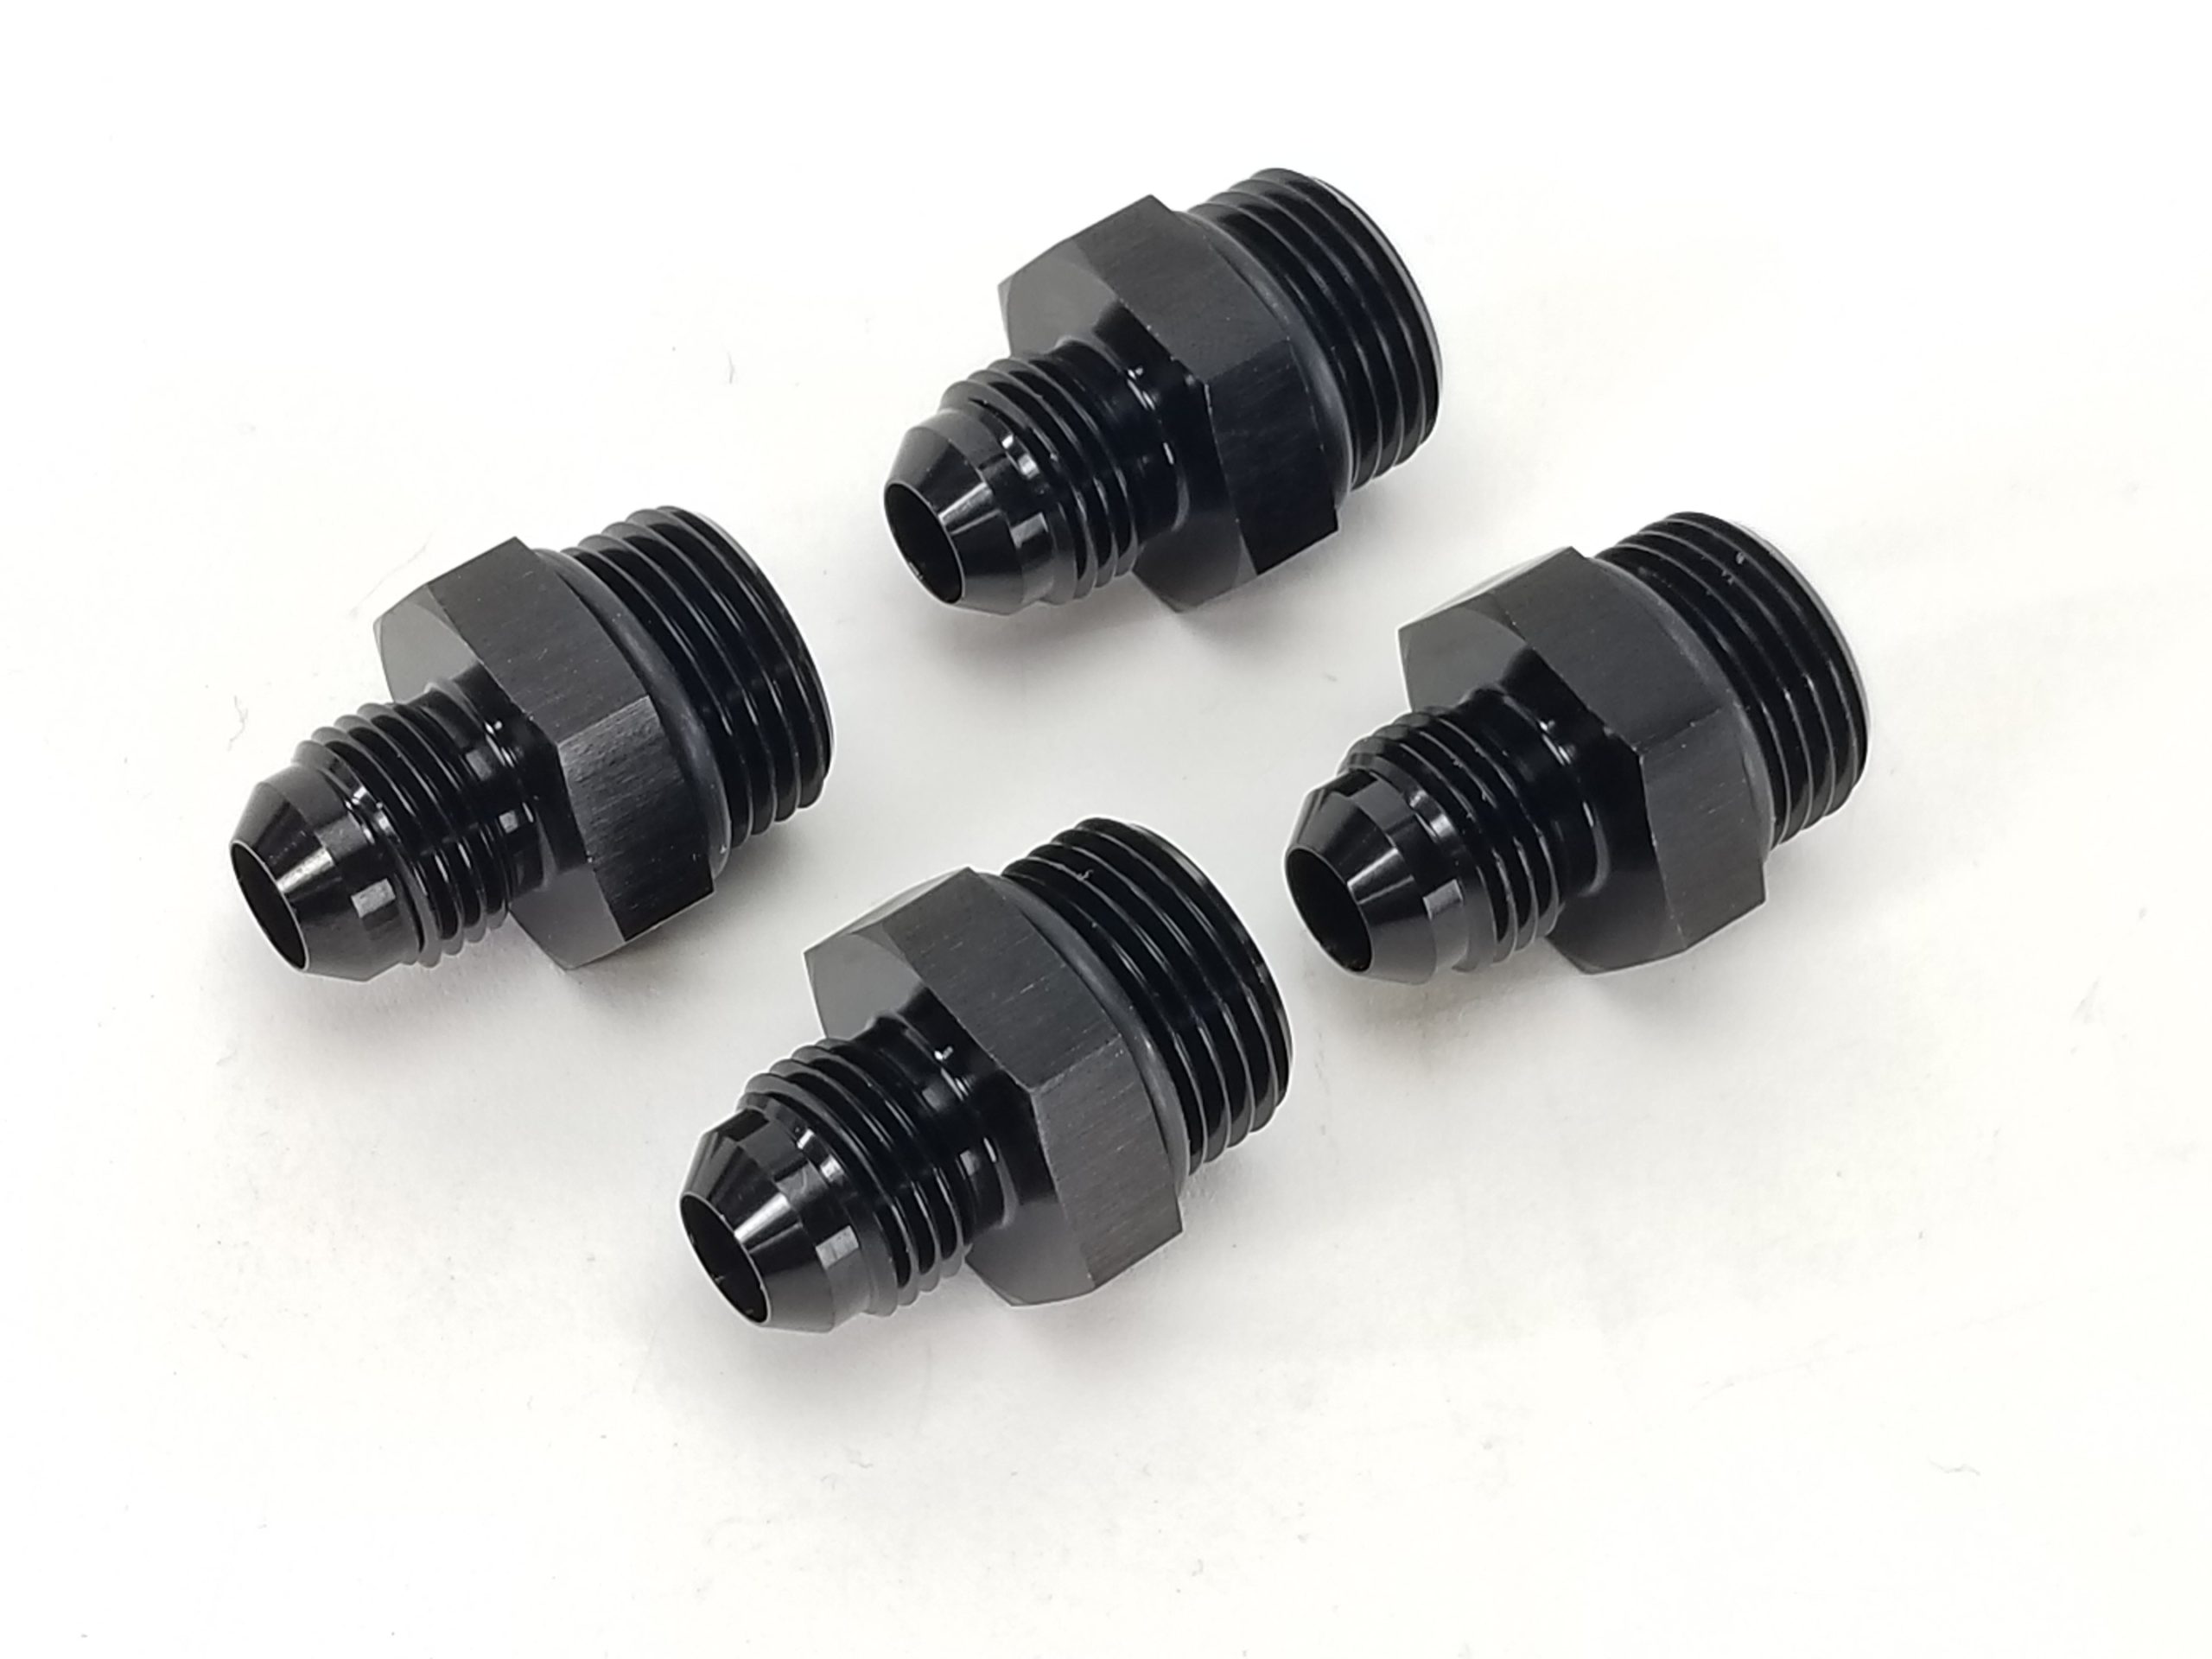 Fuel Rail Fitting Kit 4 -6AN adapters - For Holley or Other -8ORB Rails -  47-0040 - WARR Performance LLC